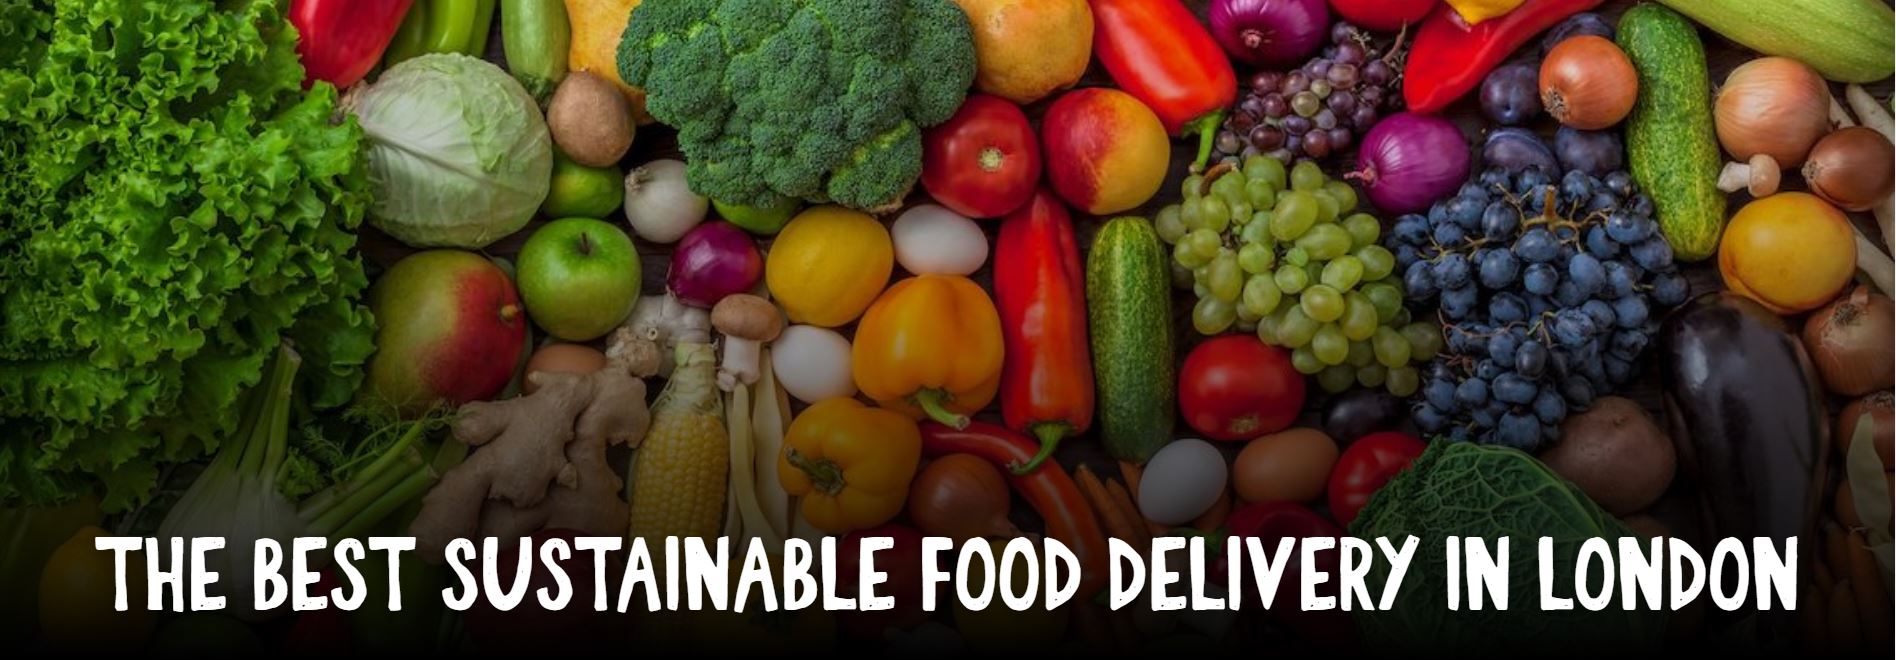 The Best Sustainable Food Delivery in London